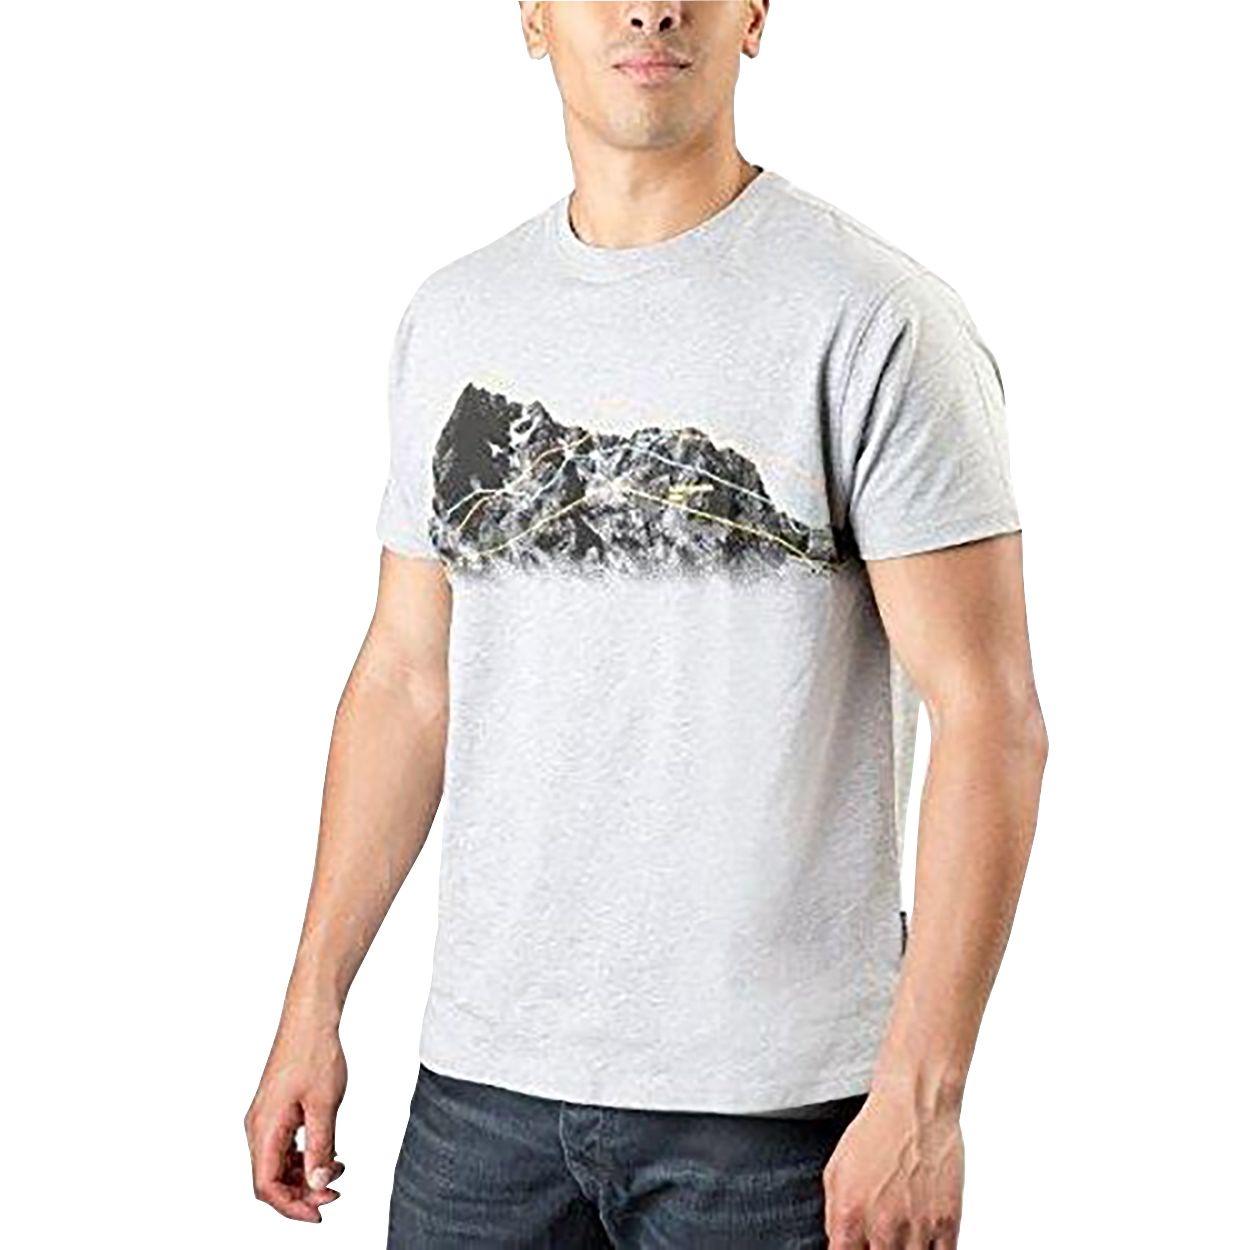 Short sleeves. Round neck. Print on chest. Quick dry. 60% Cotton, 40% Polyester. Trespass Mens Chest Sizing (approx): S - 35-37in/89-94cm, M - 38-40in/96.5-101.5cm, L - 41-43in/104-109cm, XL - 44-46in/111.5-117cm, XXL - 46-48in/117-122cm, 3XL - 48-50in/122-127cm.